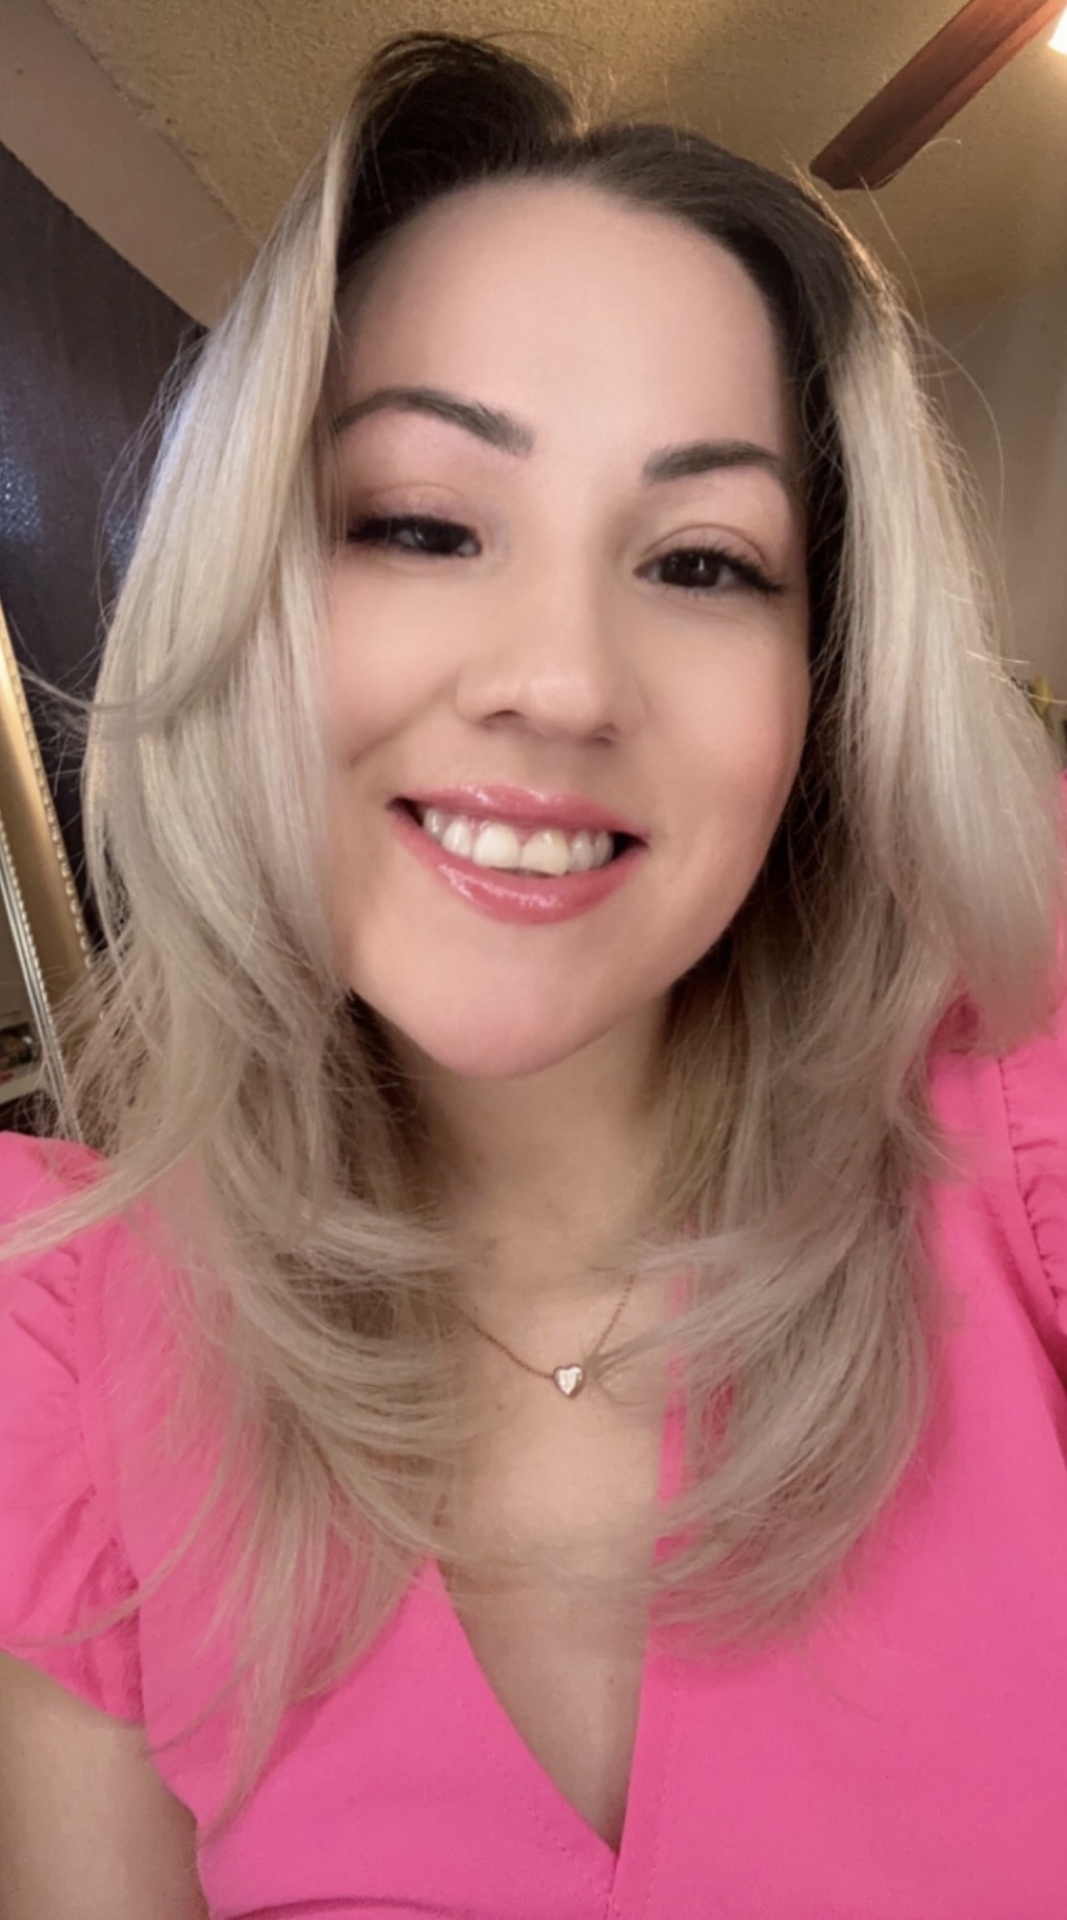 The Image shows Alexis Feliz. She has blonde hair and brown eyes. She has a professional pink blouse on and she is smiling.